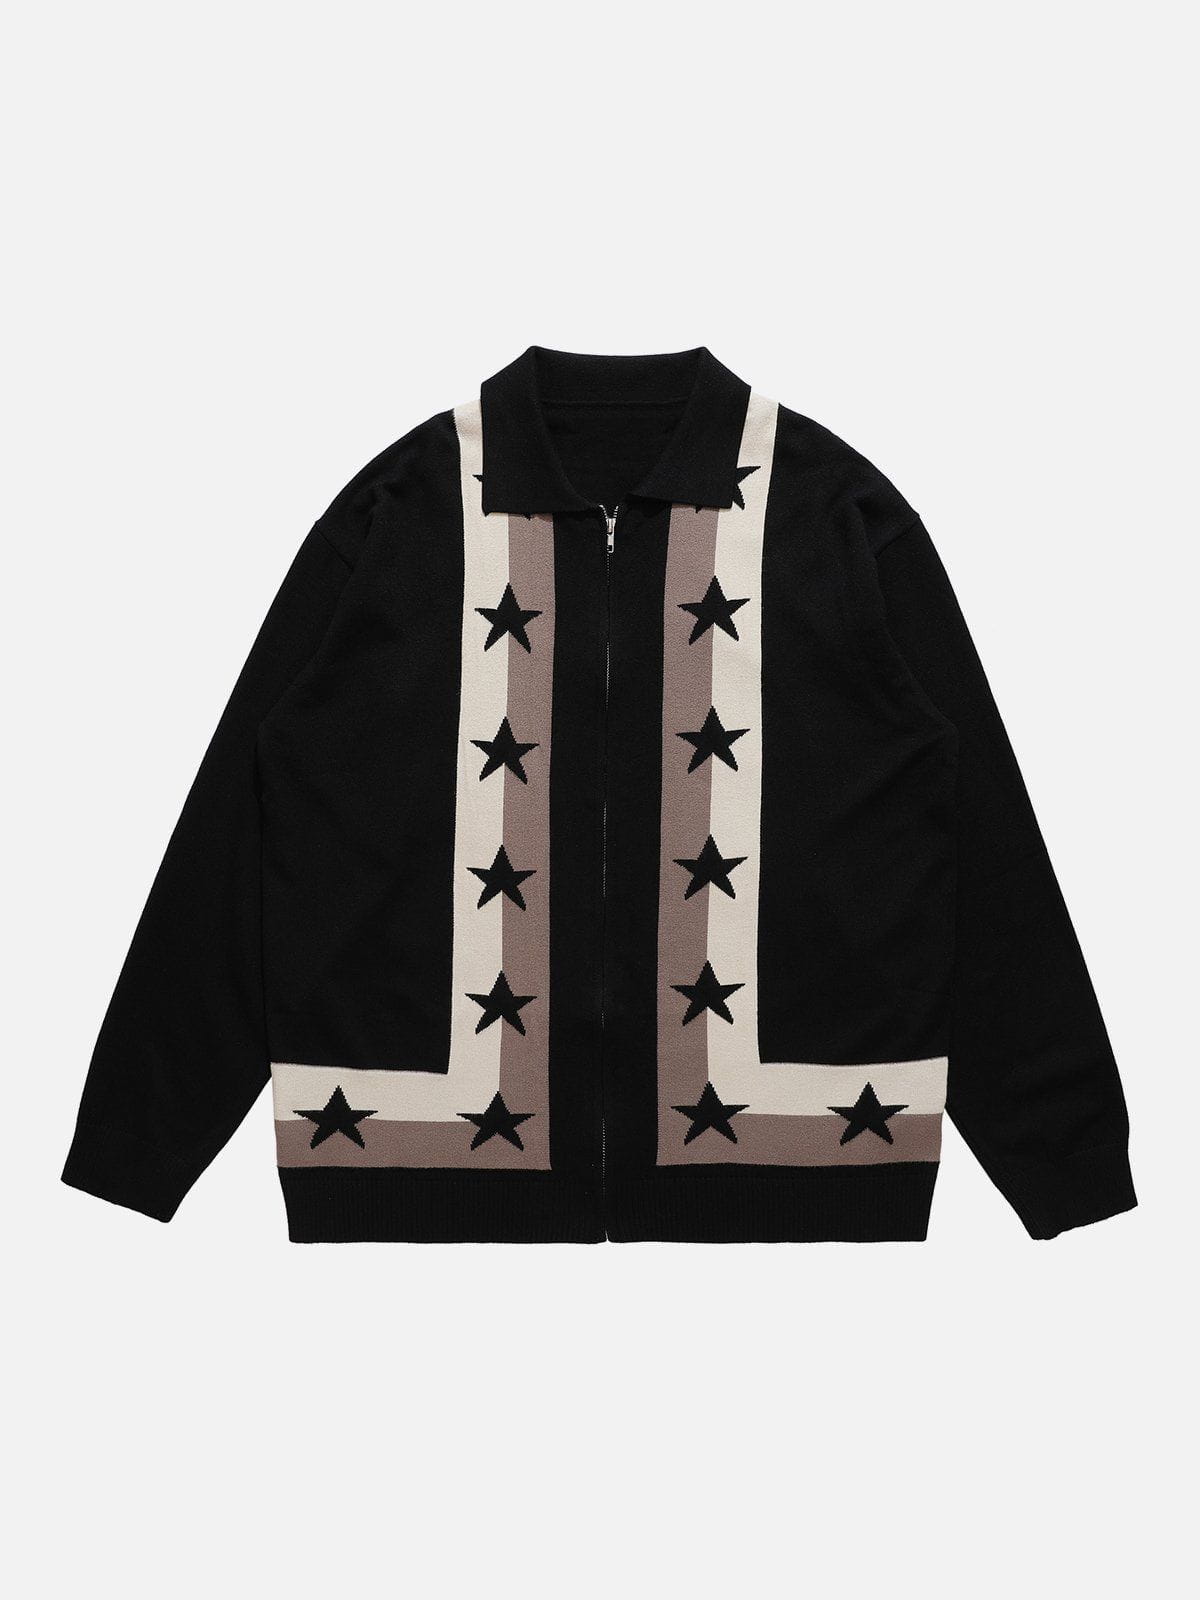 Majesda® - Star Colorblock Embroidery Cardigan outfit ideas streetwear fashion